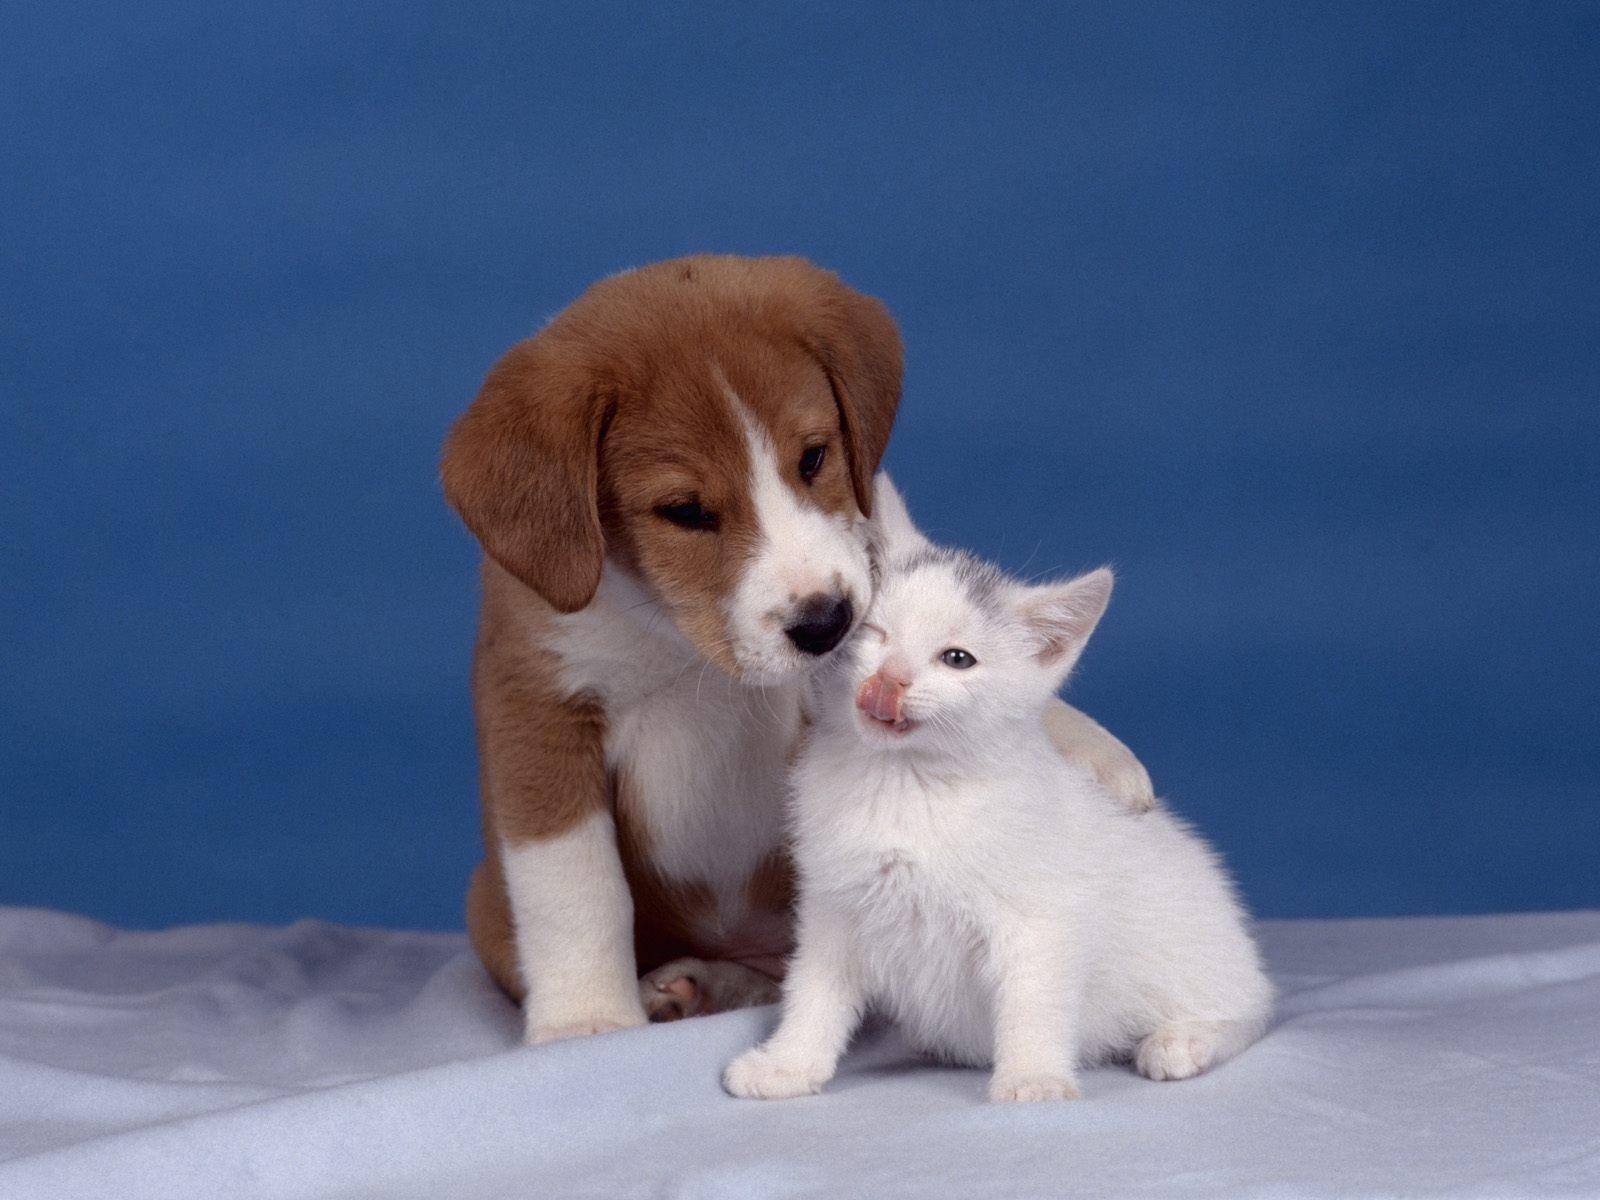 Kittens and Puppies Together. Here a some of the cute puppies